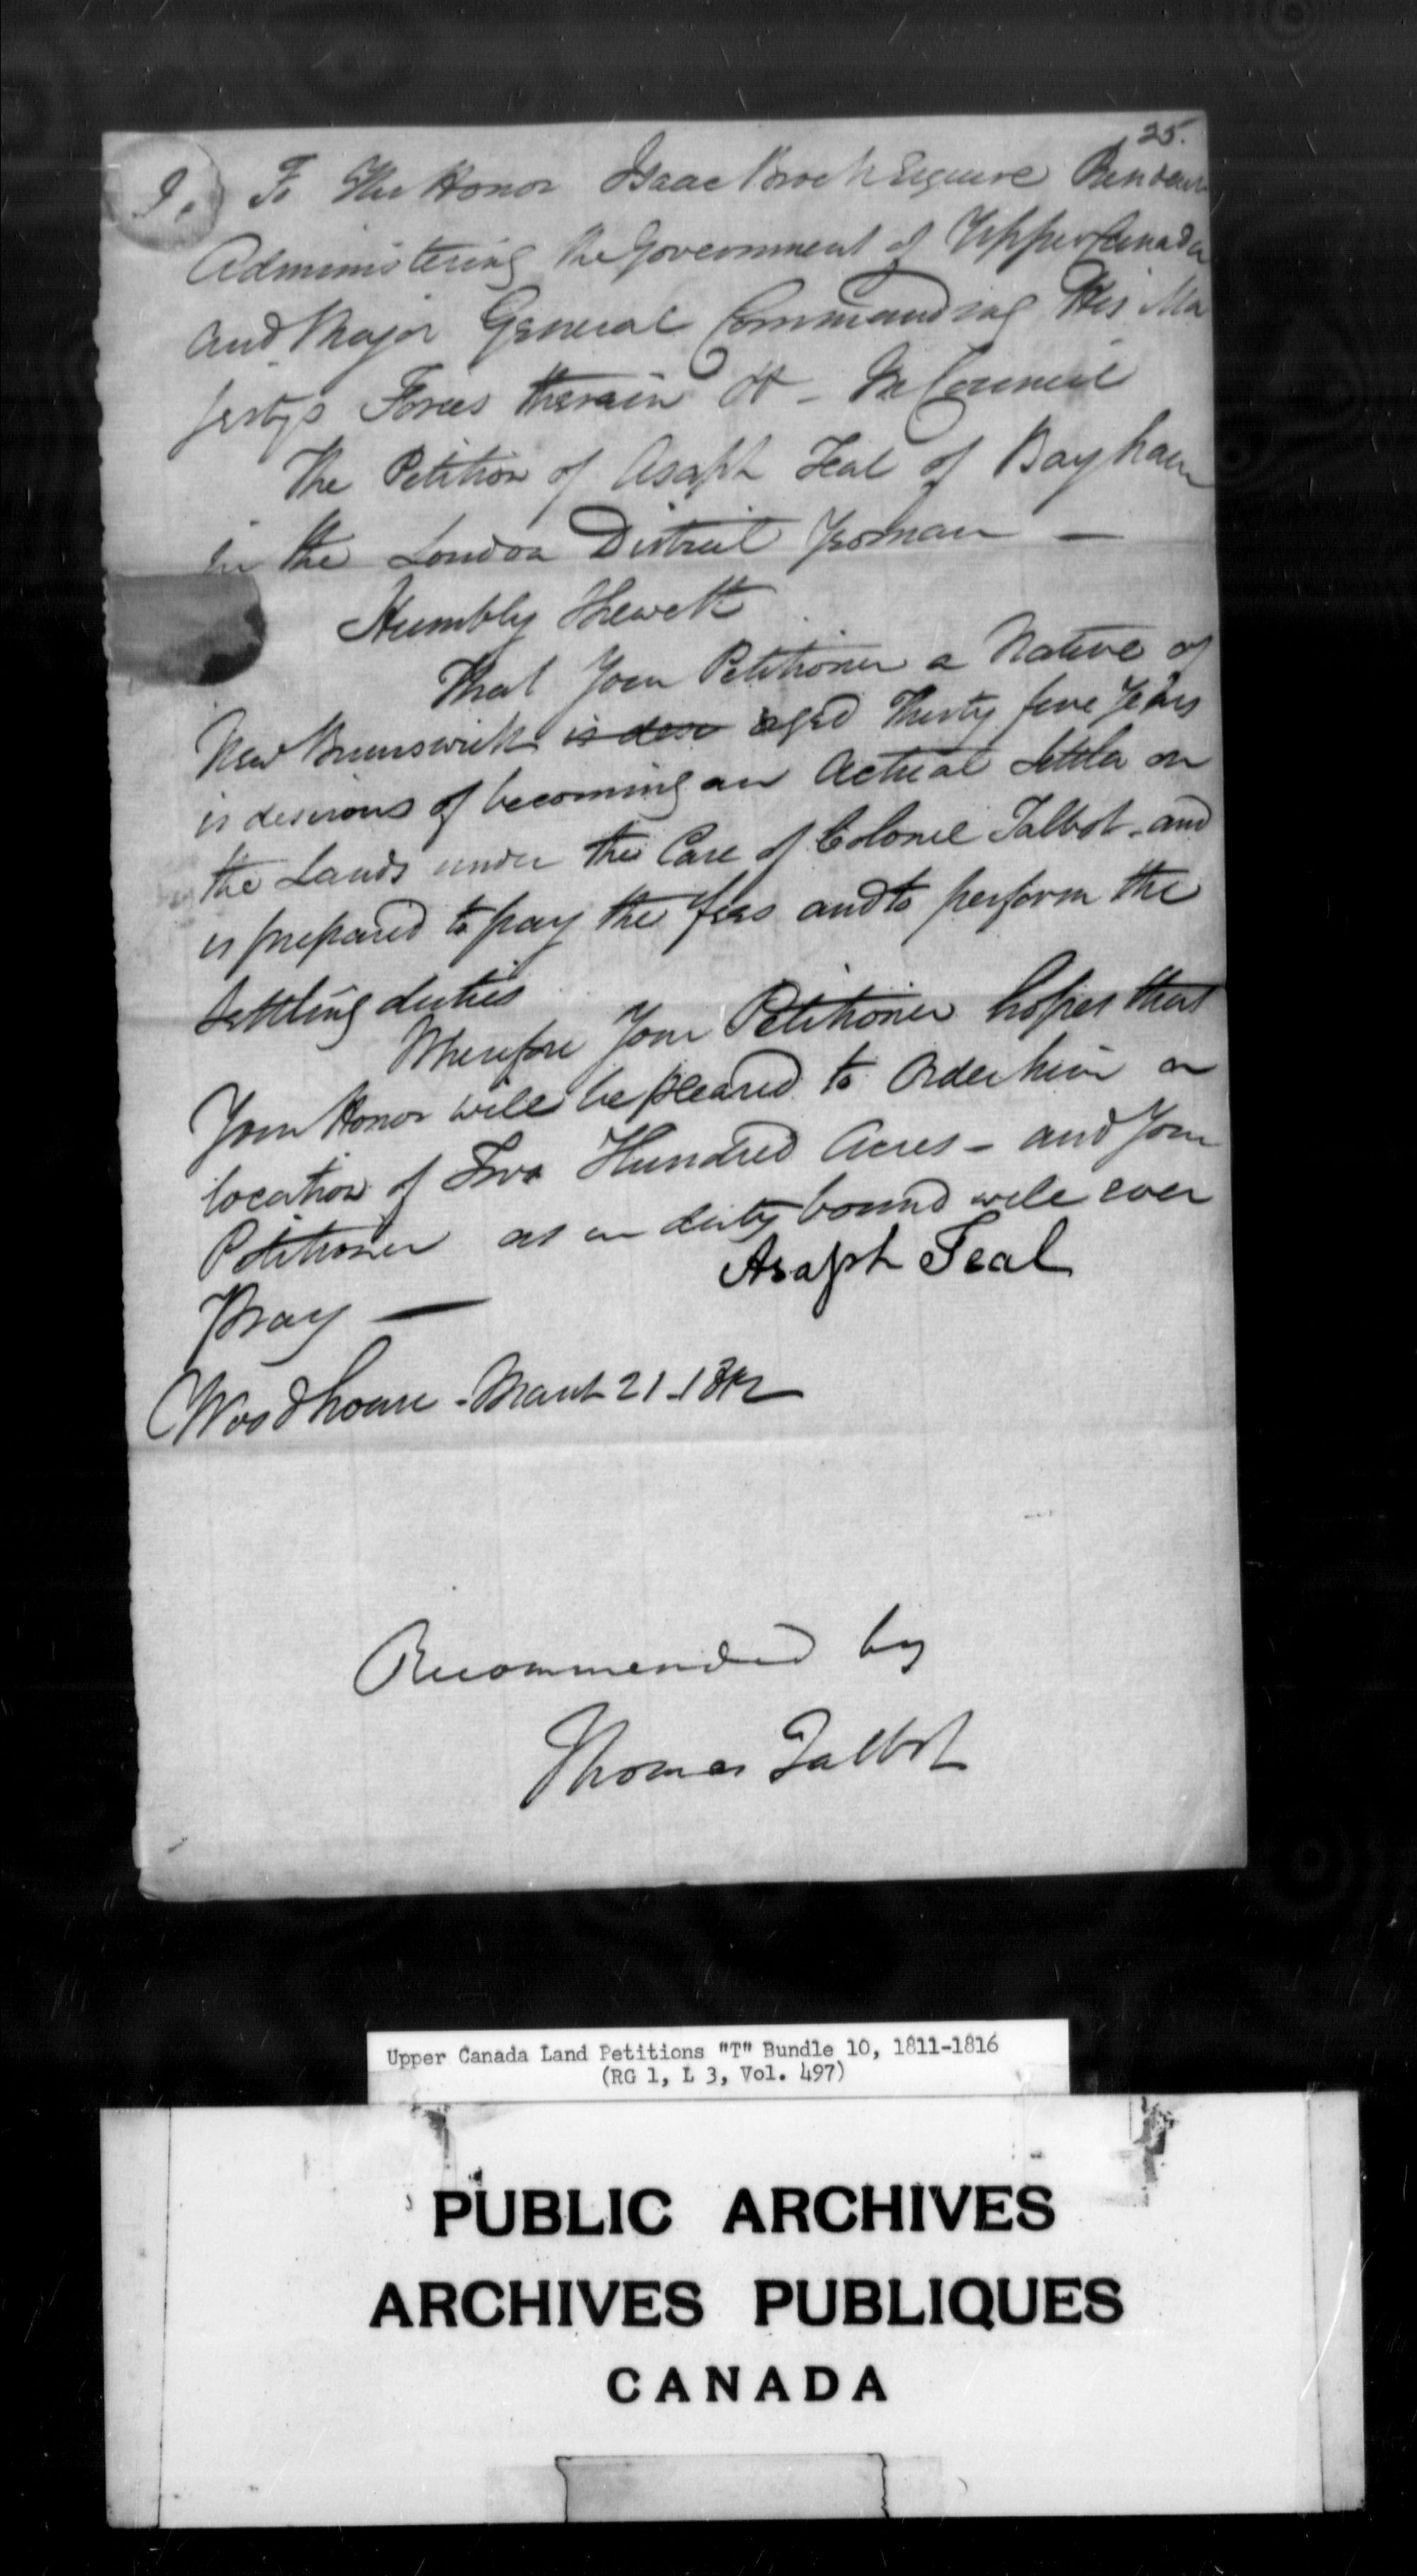 Title: Upper Canada Land Petitions (1763-1865) - Mikan Number: 205131 - Microform: c-2834